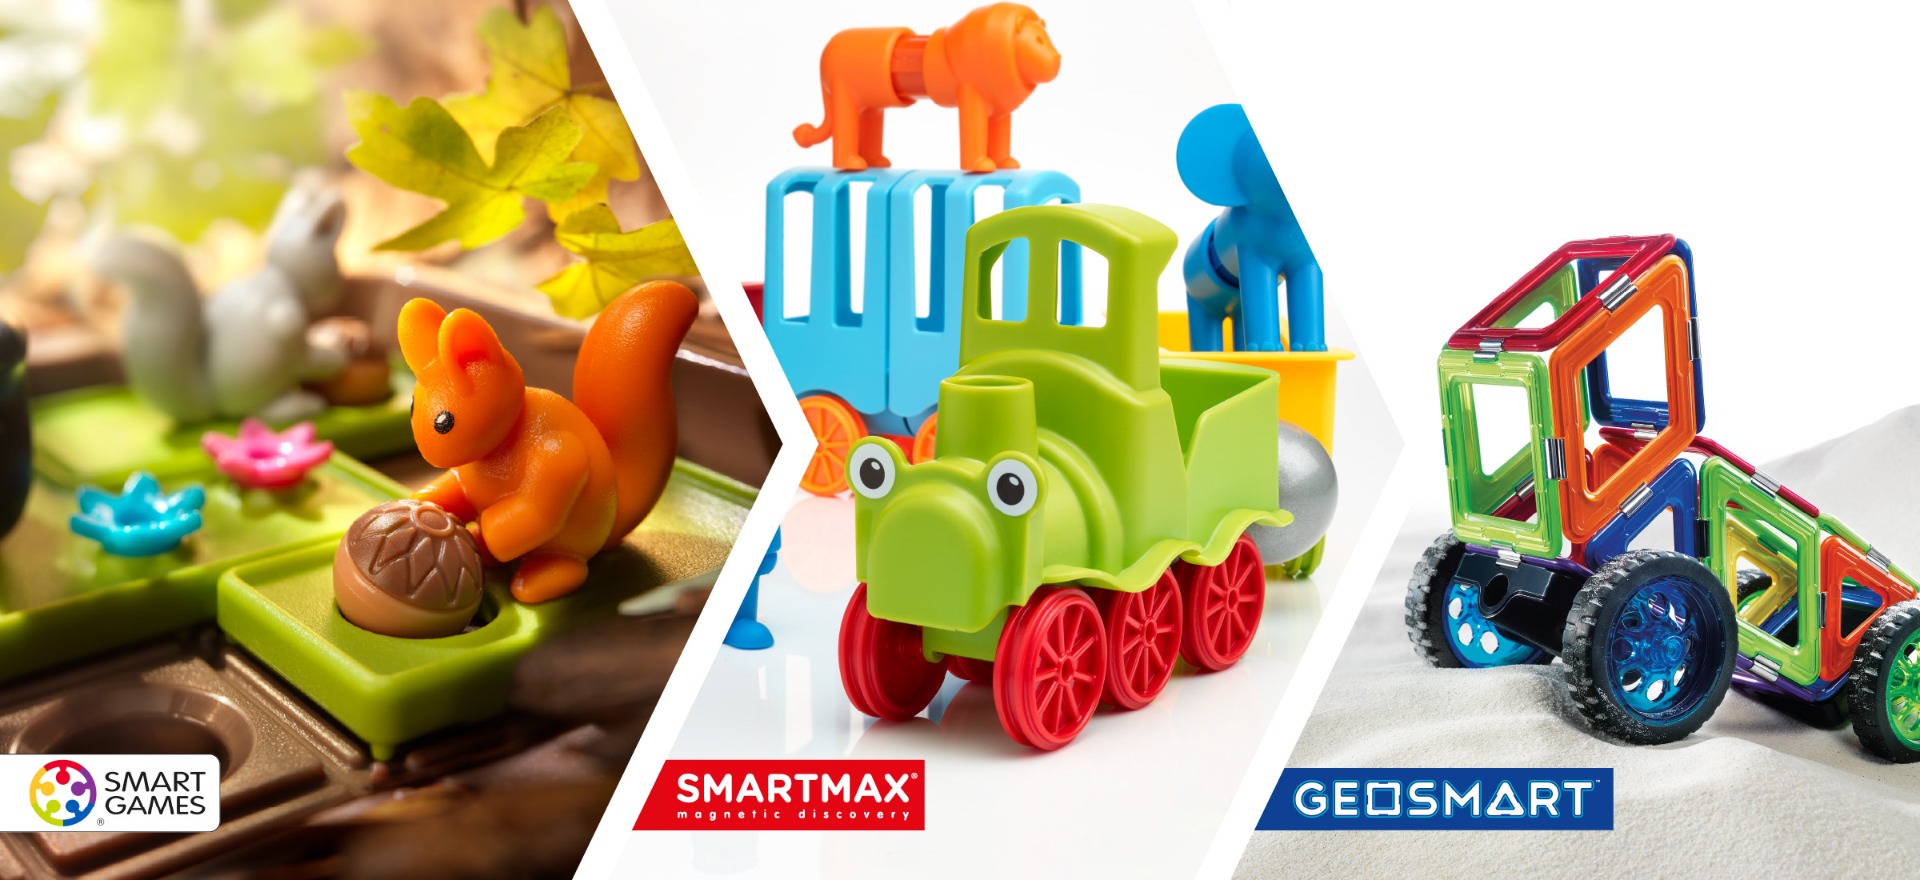 Our brands, SmartGames, SmartMax and Geosmart